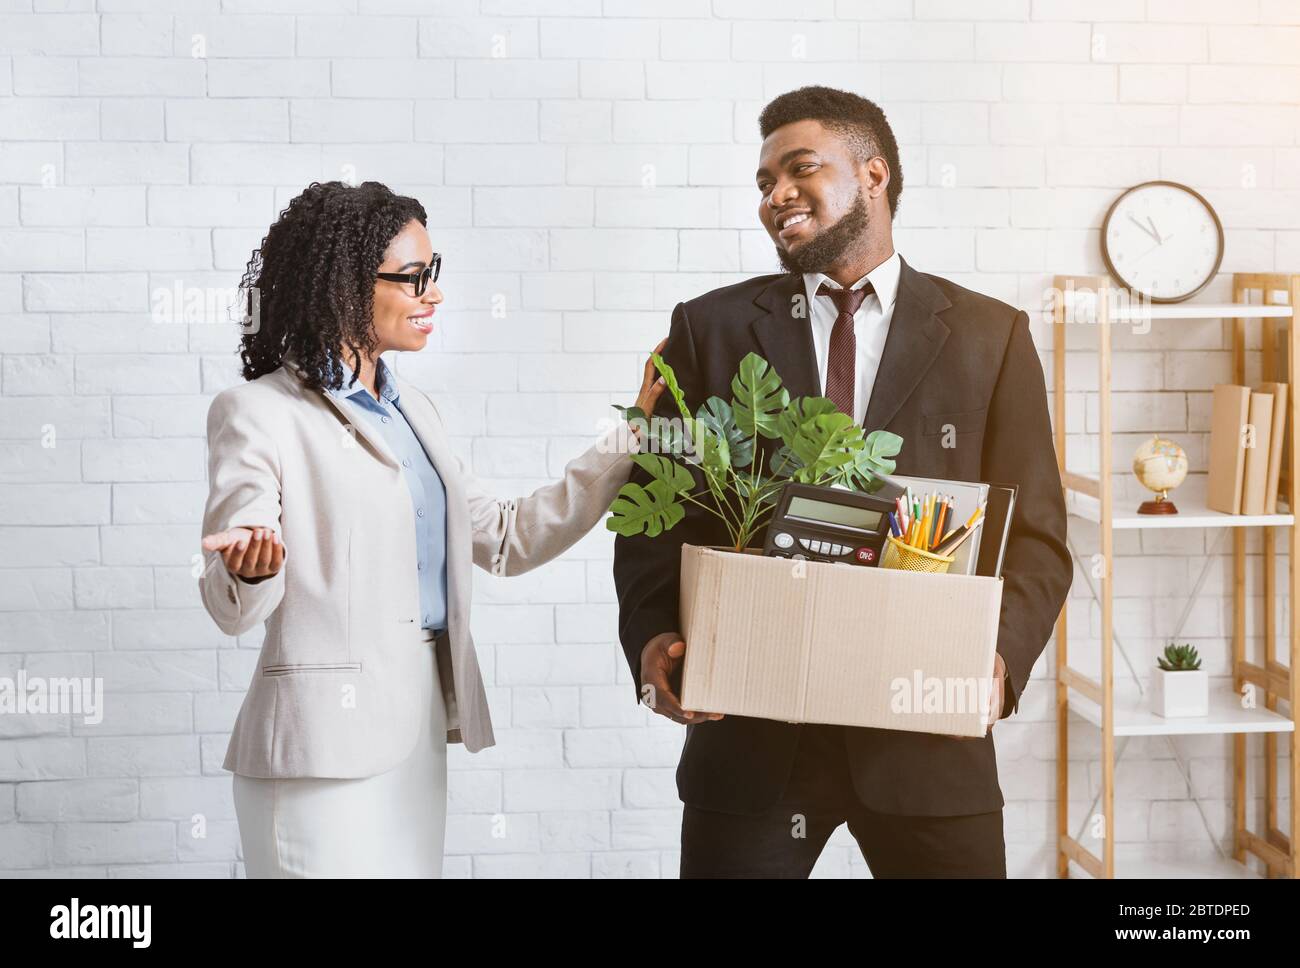 Joyful black guy with personal belongings being welcomed to work in company, meeting his new female boss Stock Photo